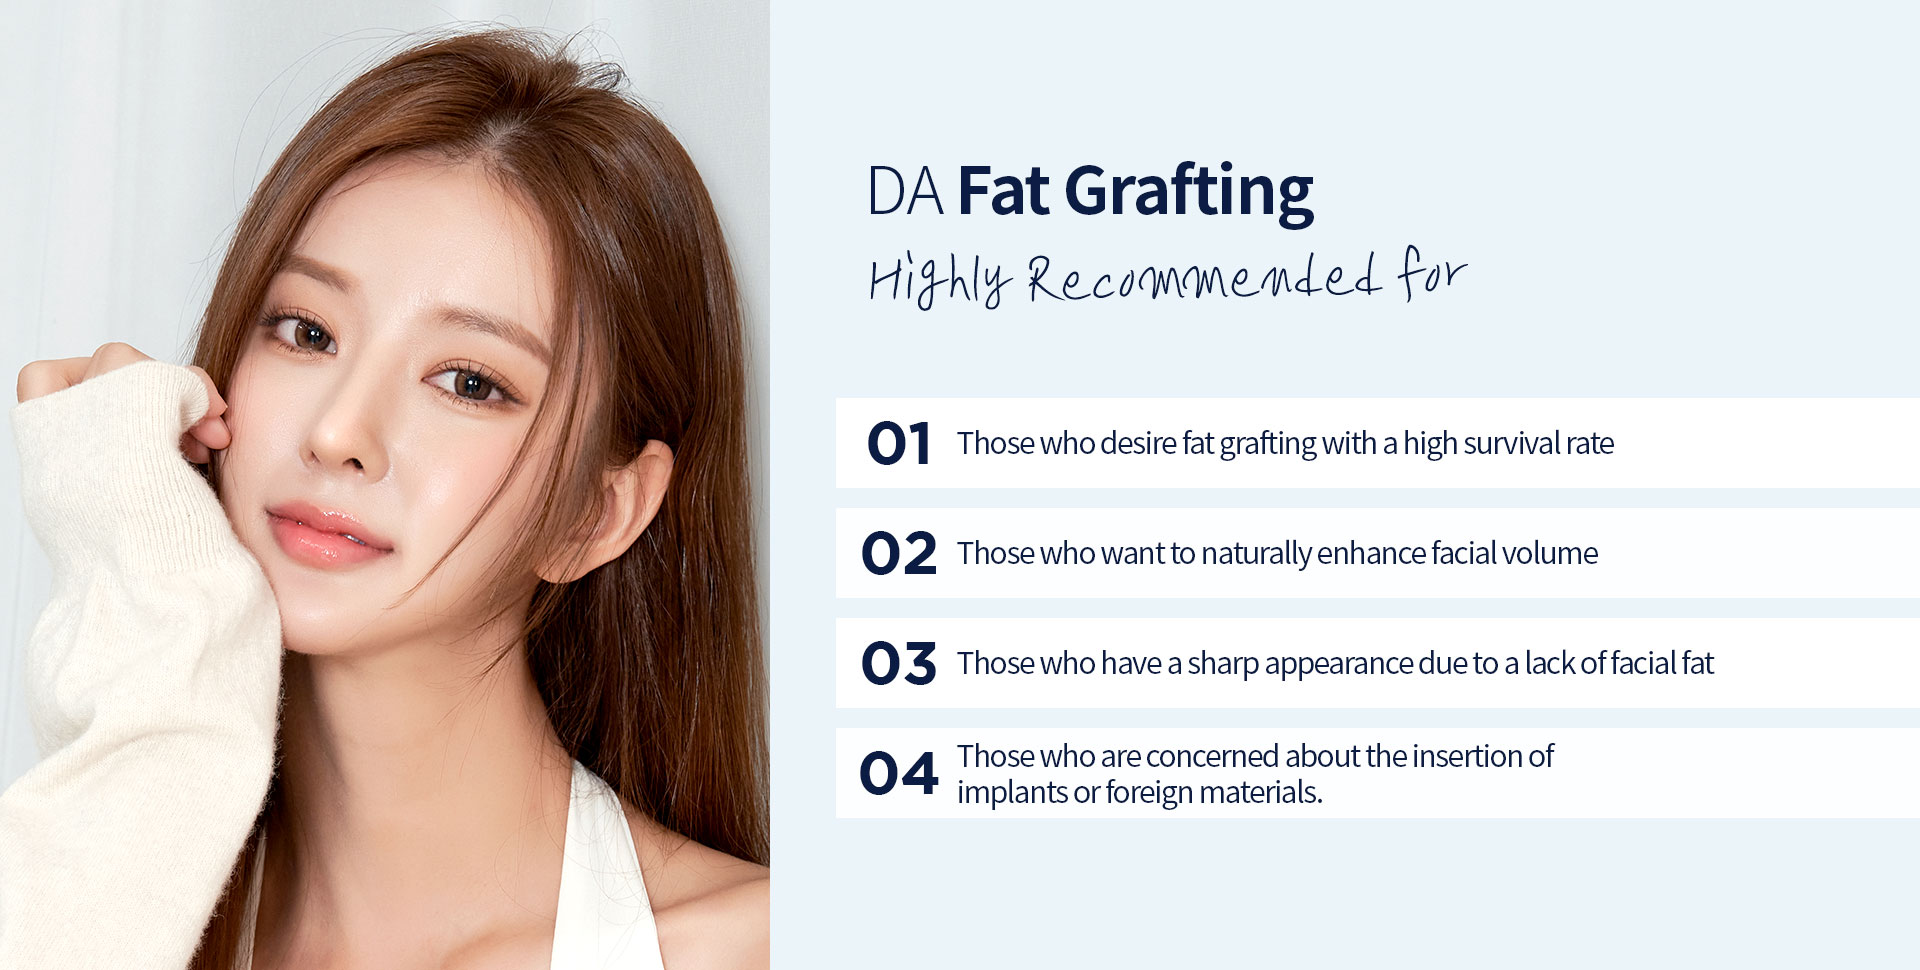 DA Fat Grafting Highly Recommended for…